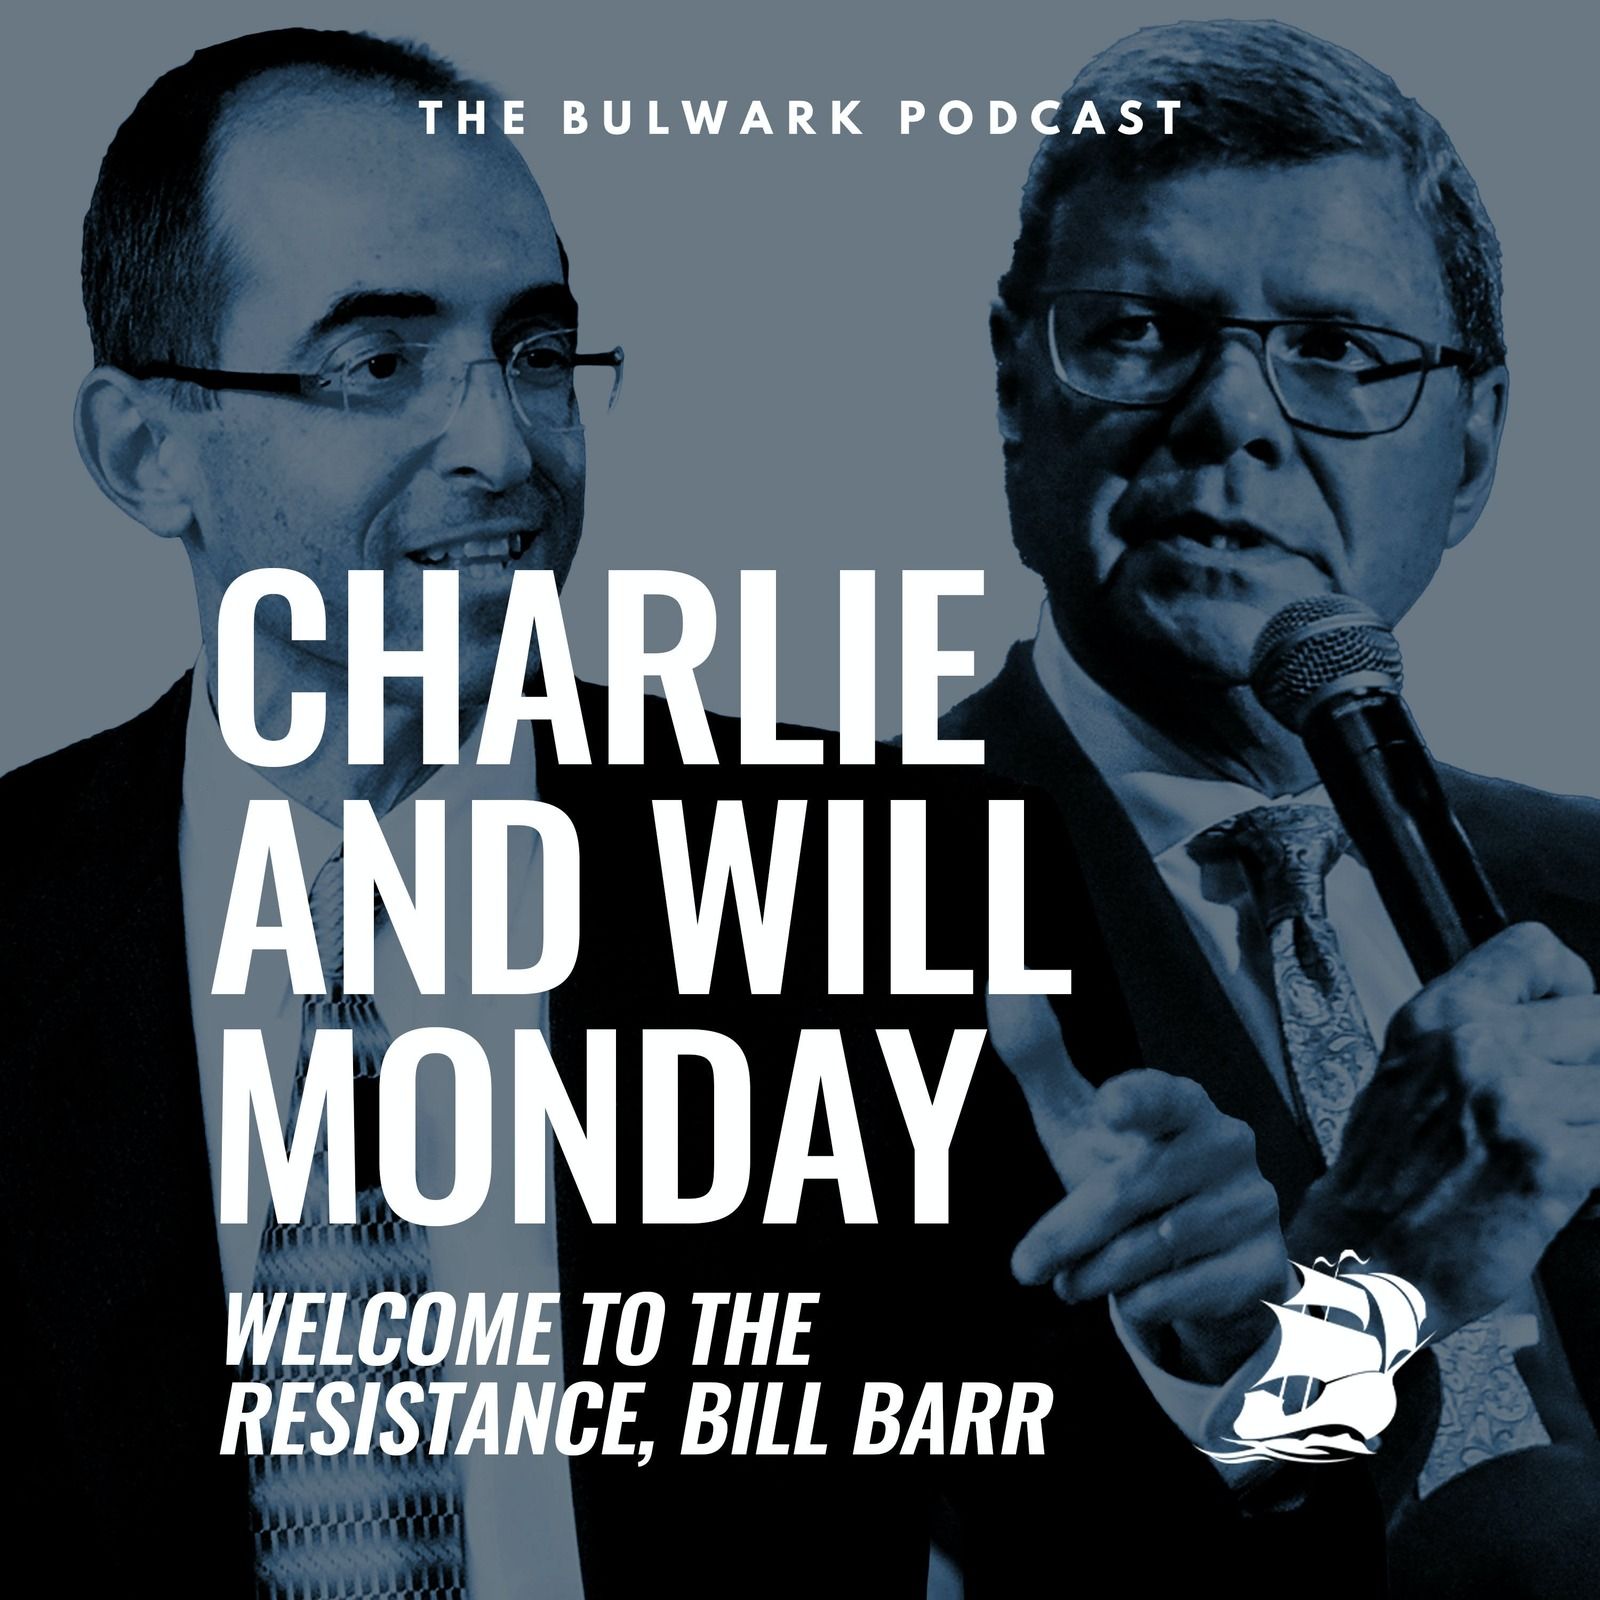 Will Saletan: Welcome to the Resistance, Bill Barr by The Bulwark Podcast